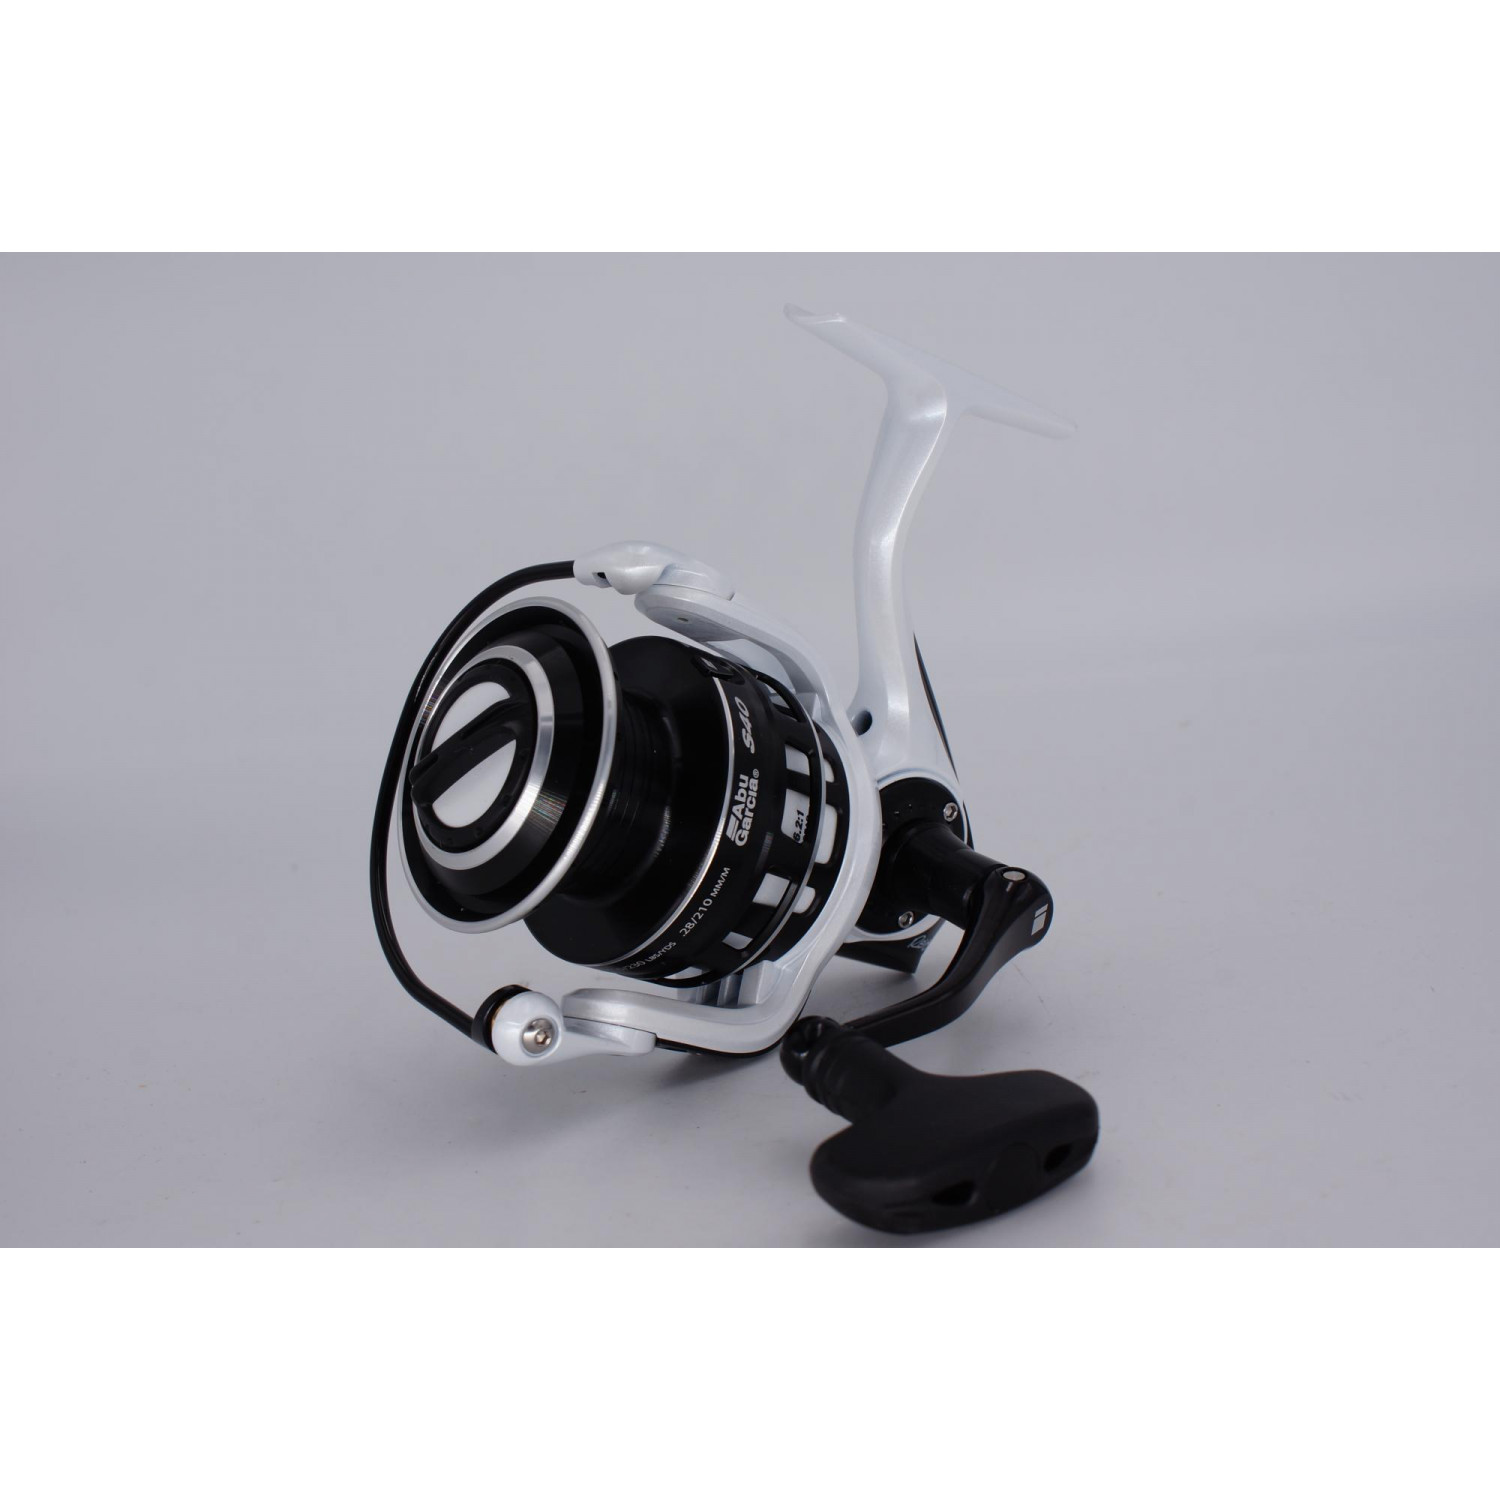 ABU GARCIA REVO S, 40, left and right hand, Spinning Fishing reel, Front  Drag, Packaging damaged